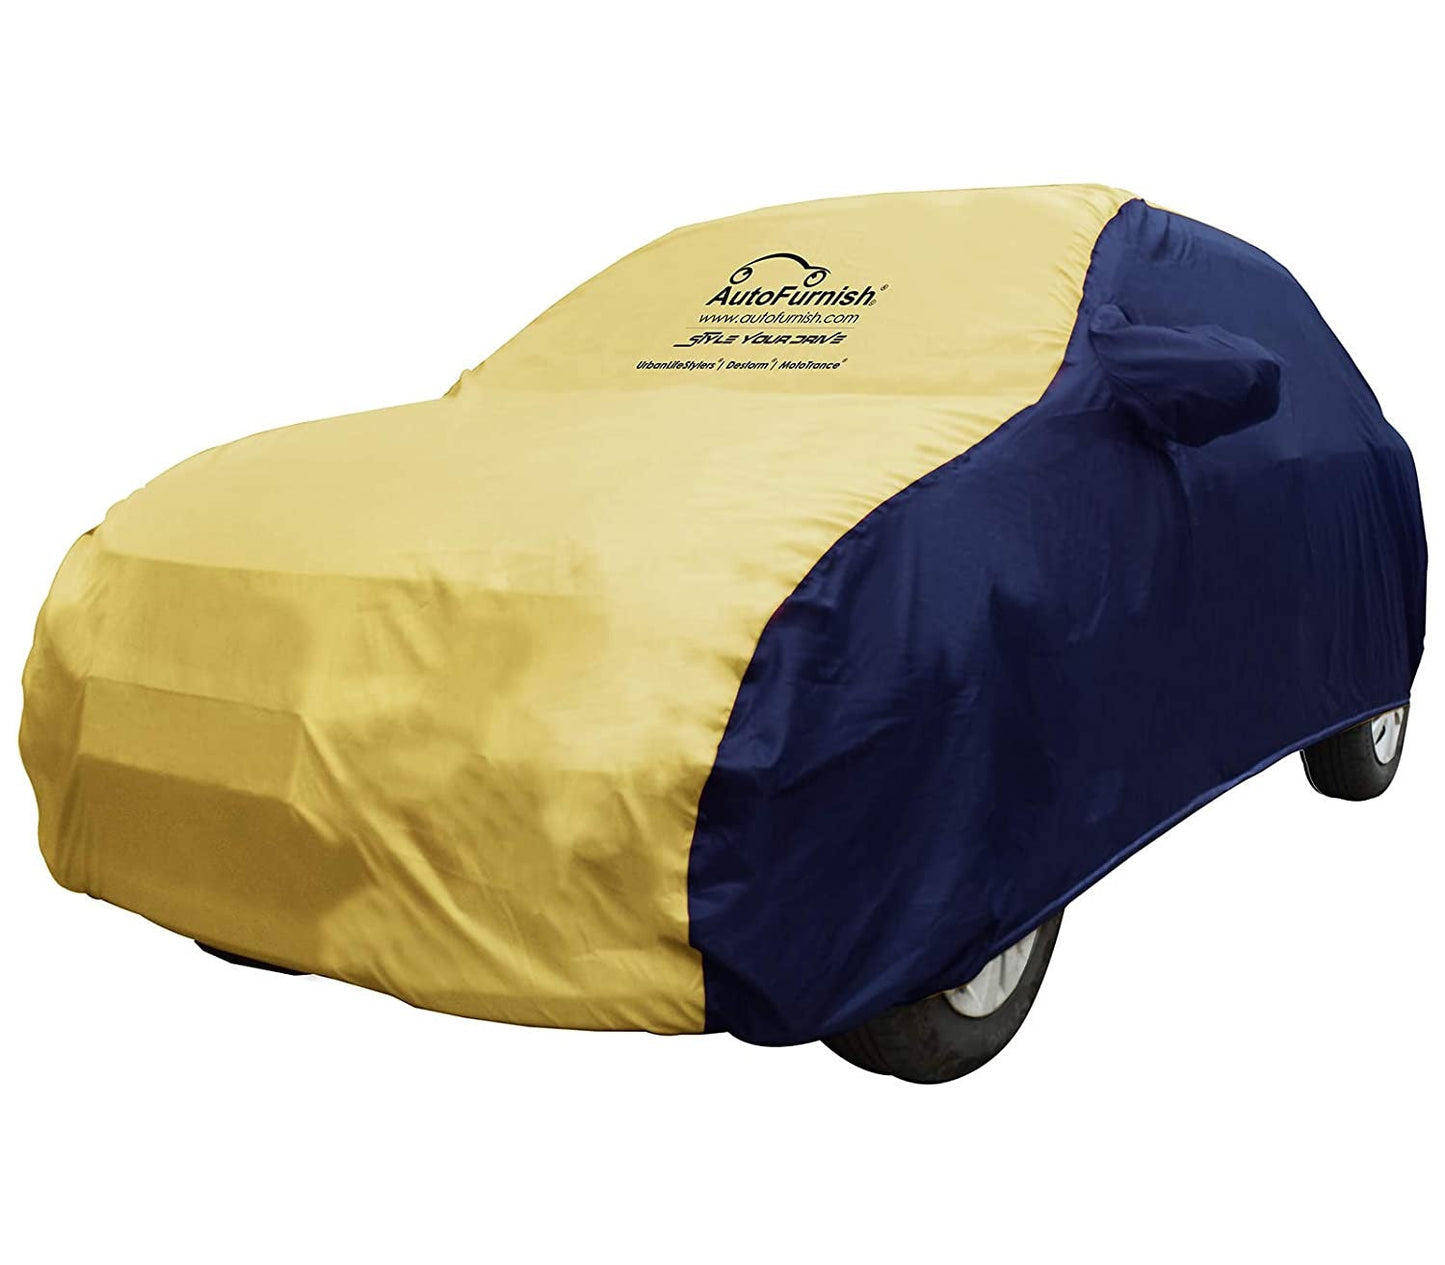 Nissan Magnite (2020) Car Body Cover, Triple Stitched, Heat & Water Resistant with Side Mirror Pockets (SPORTY Series)